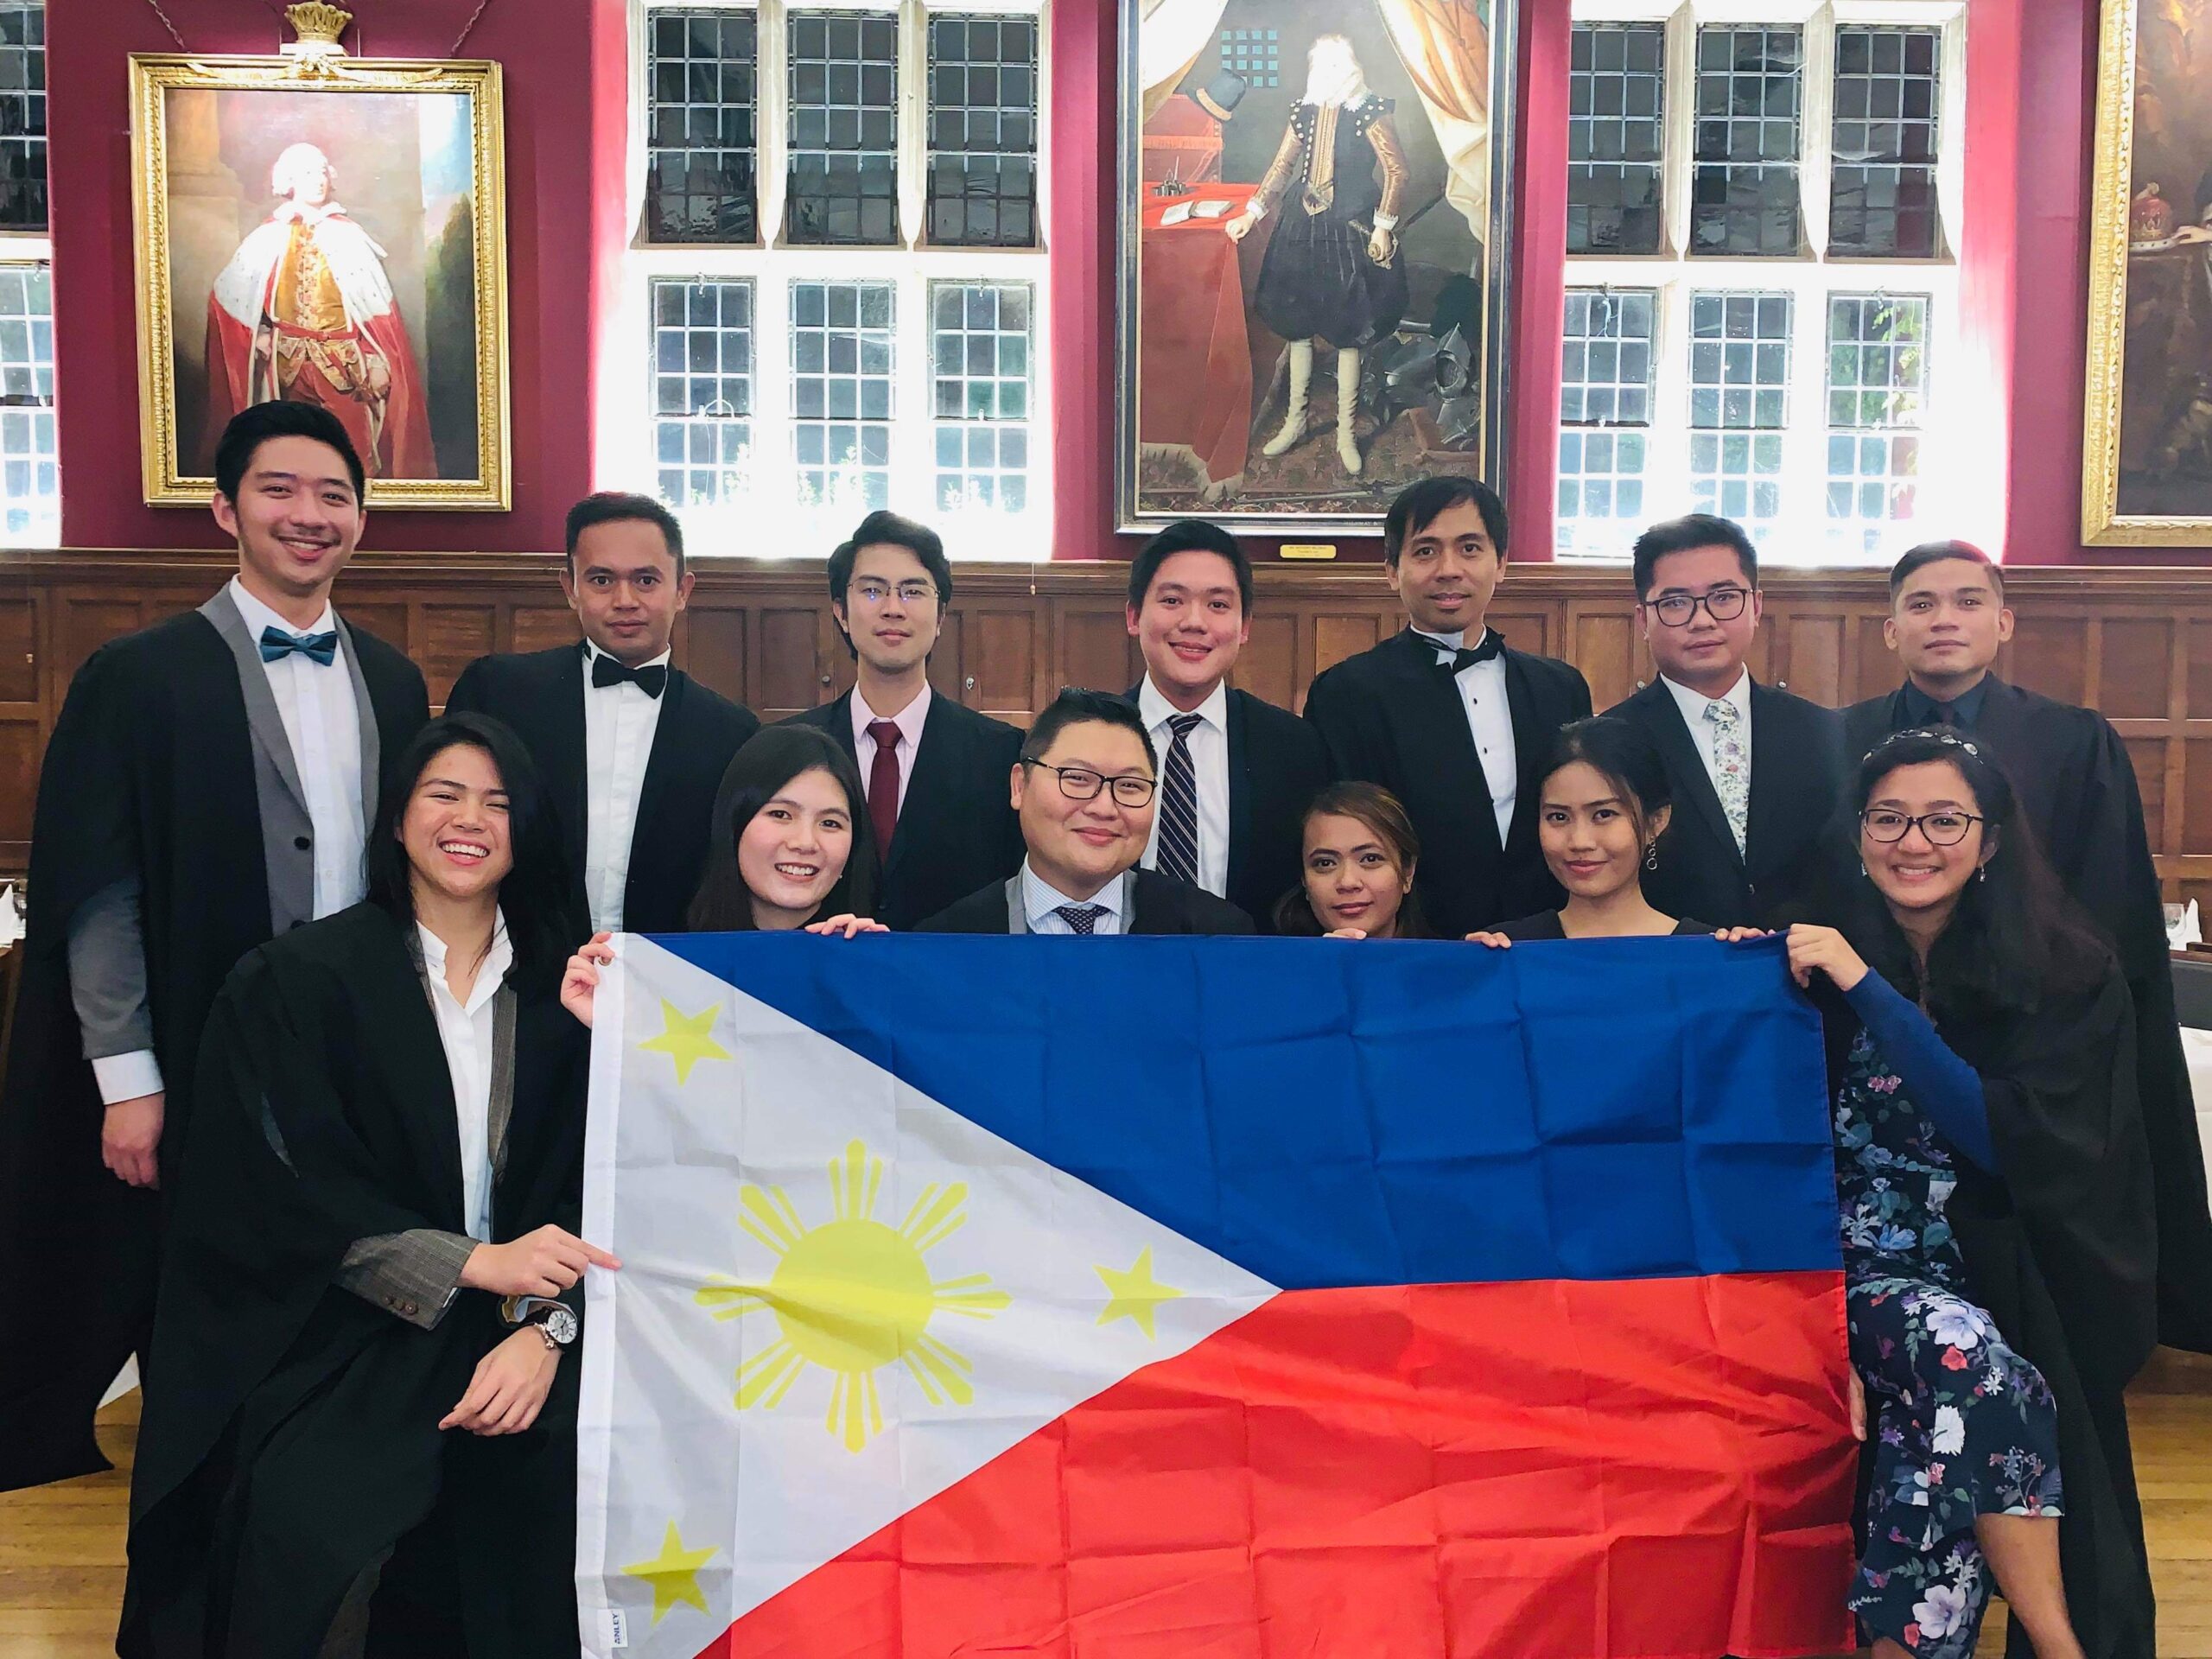 Filipinos thrive and graduate with honors in a locked-down Cambridge